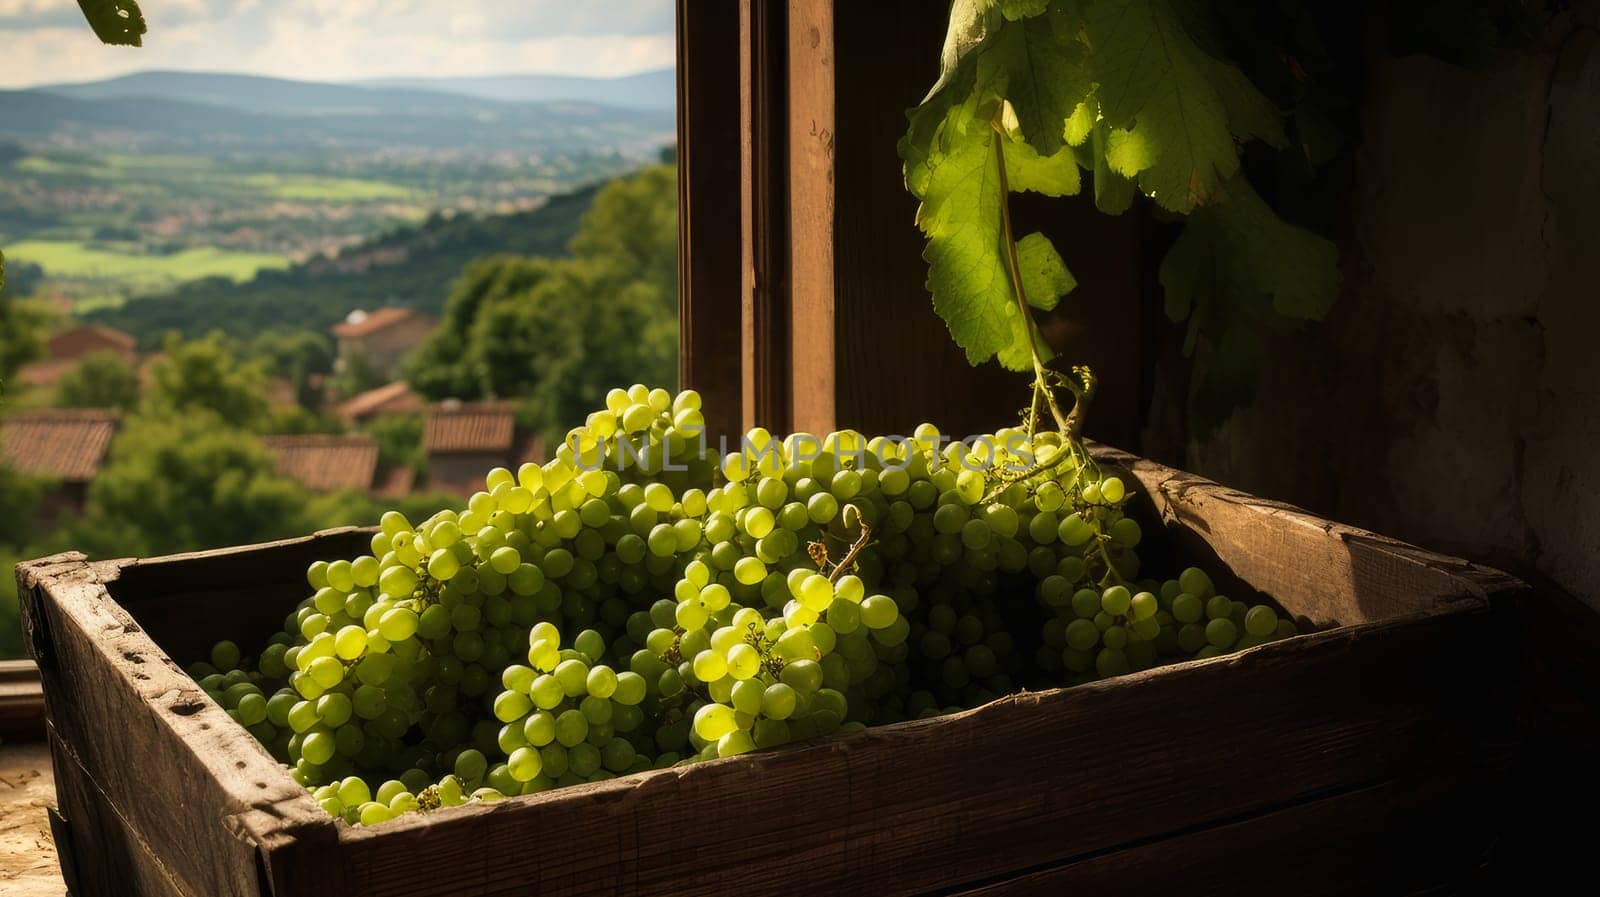 Collection of green grapes. Grapes in a basket and in the vineyard. Autumn mood in the wine industry countryside against the backdrop of the sun. Wine making, vineyards, tourism business, small and private business, chain restaurant, flavorful food